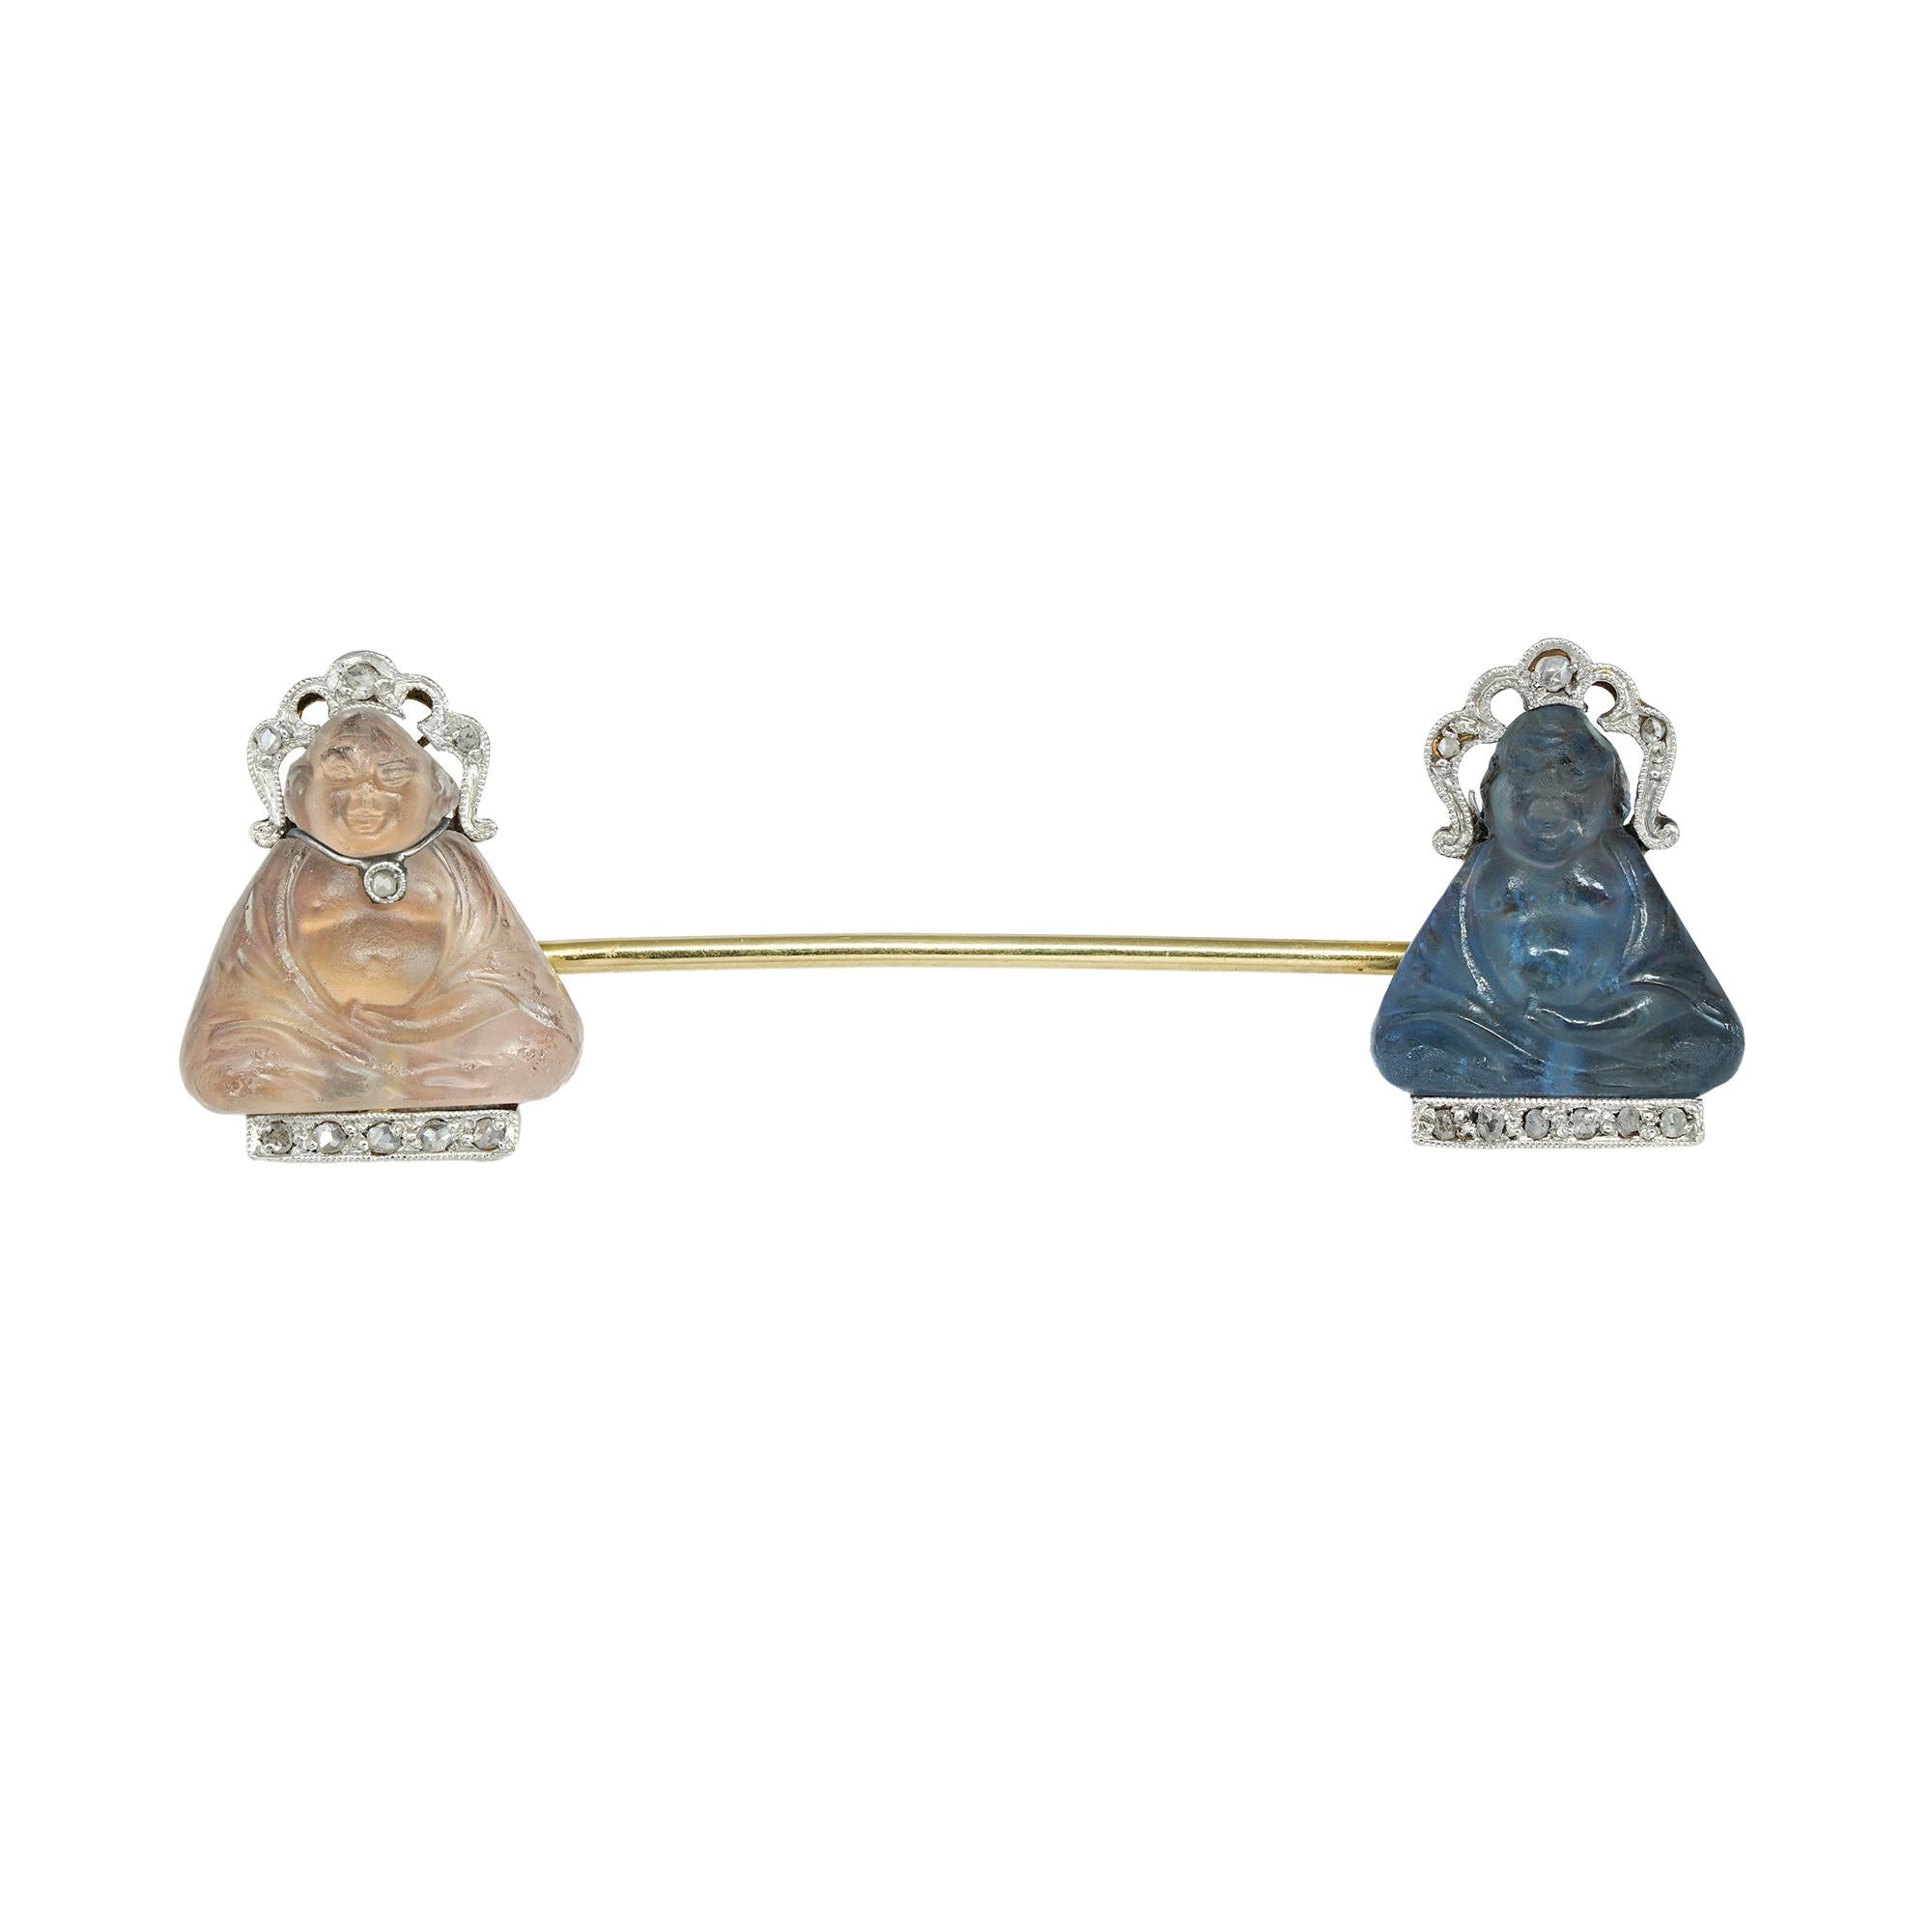 An Art Deco double Buddha jabot pin, with a blue and a white pâte de verre Buddhas, each embellished with rose-cut diamond-set halo and base, the white one bearing also a pendant, all set in platinum and gold, possibly French circa 1920, measuring